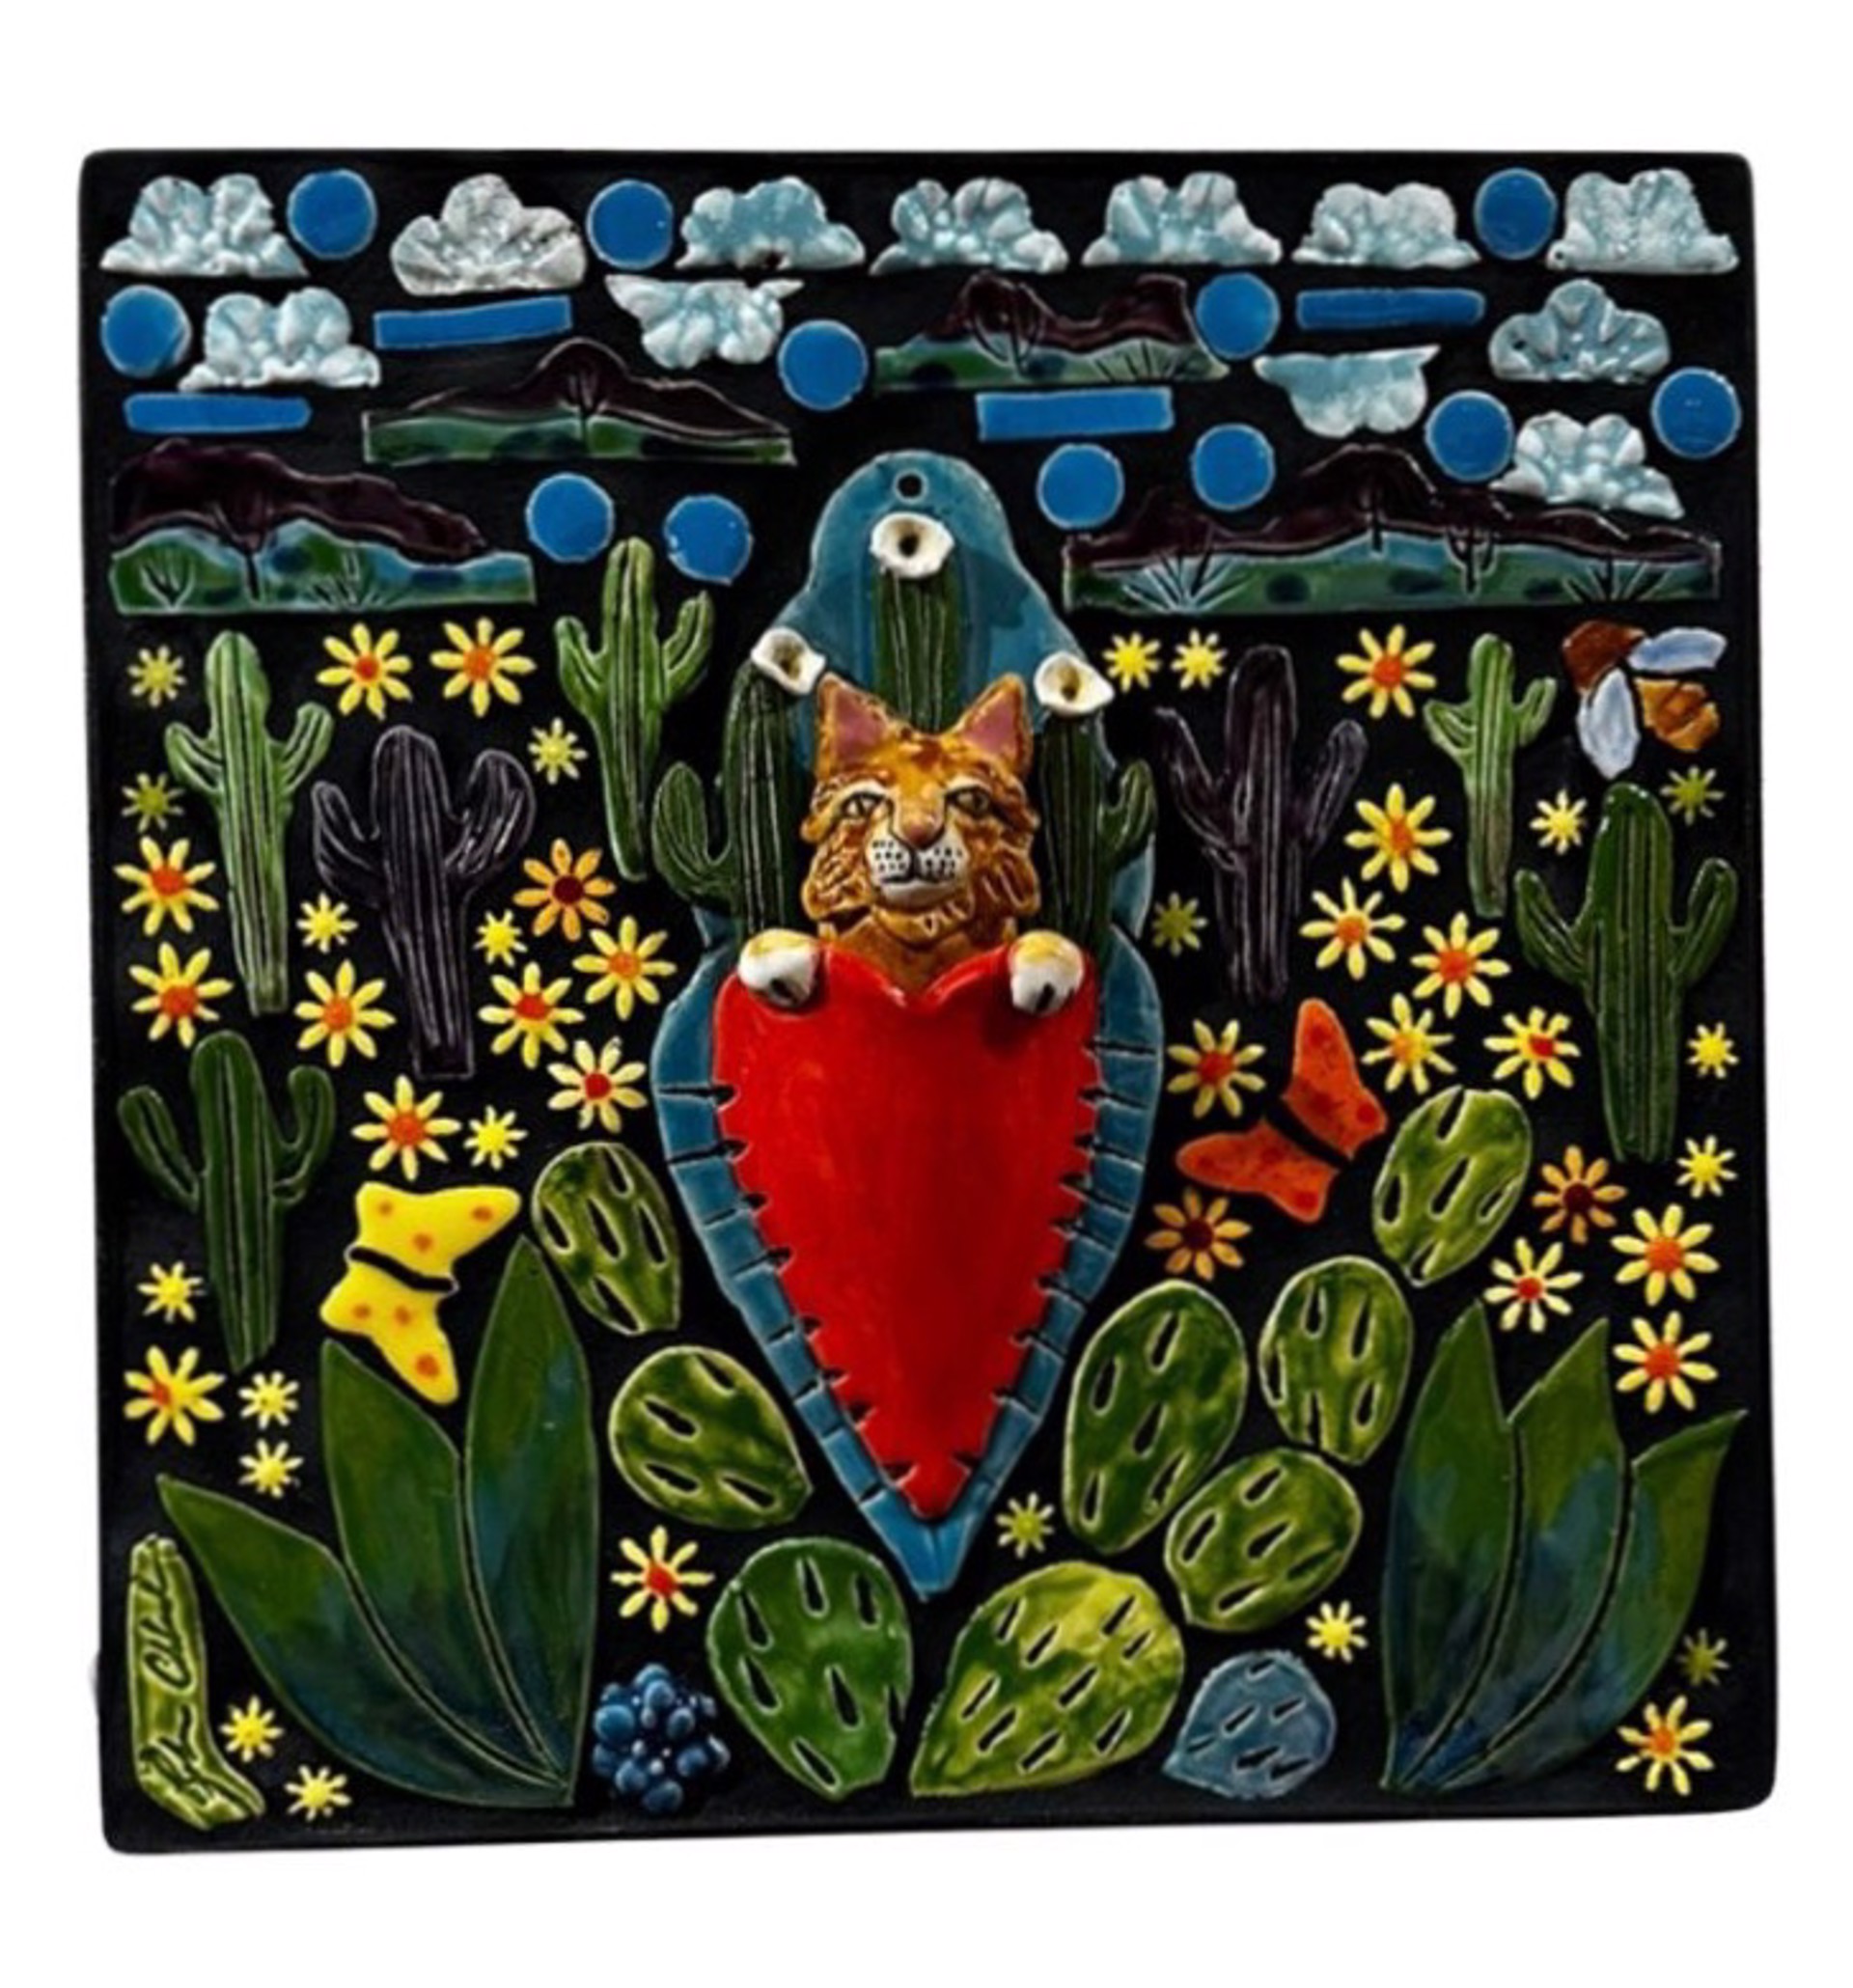 Wildcat Heart - Pocket Mosaic by Robin Chlad